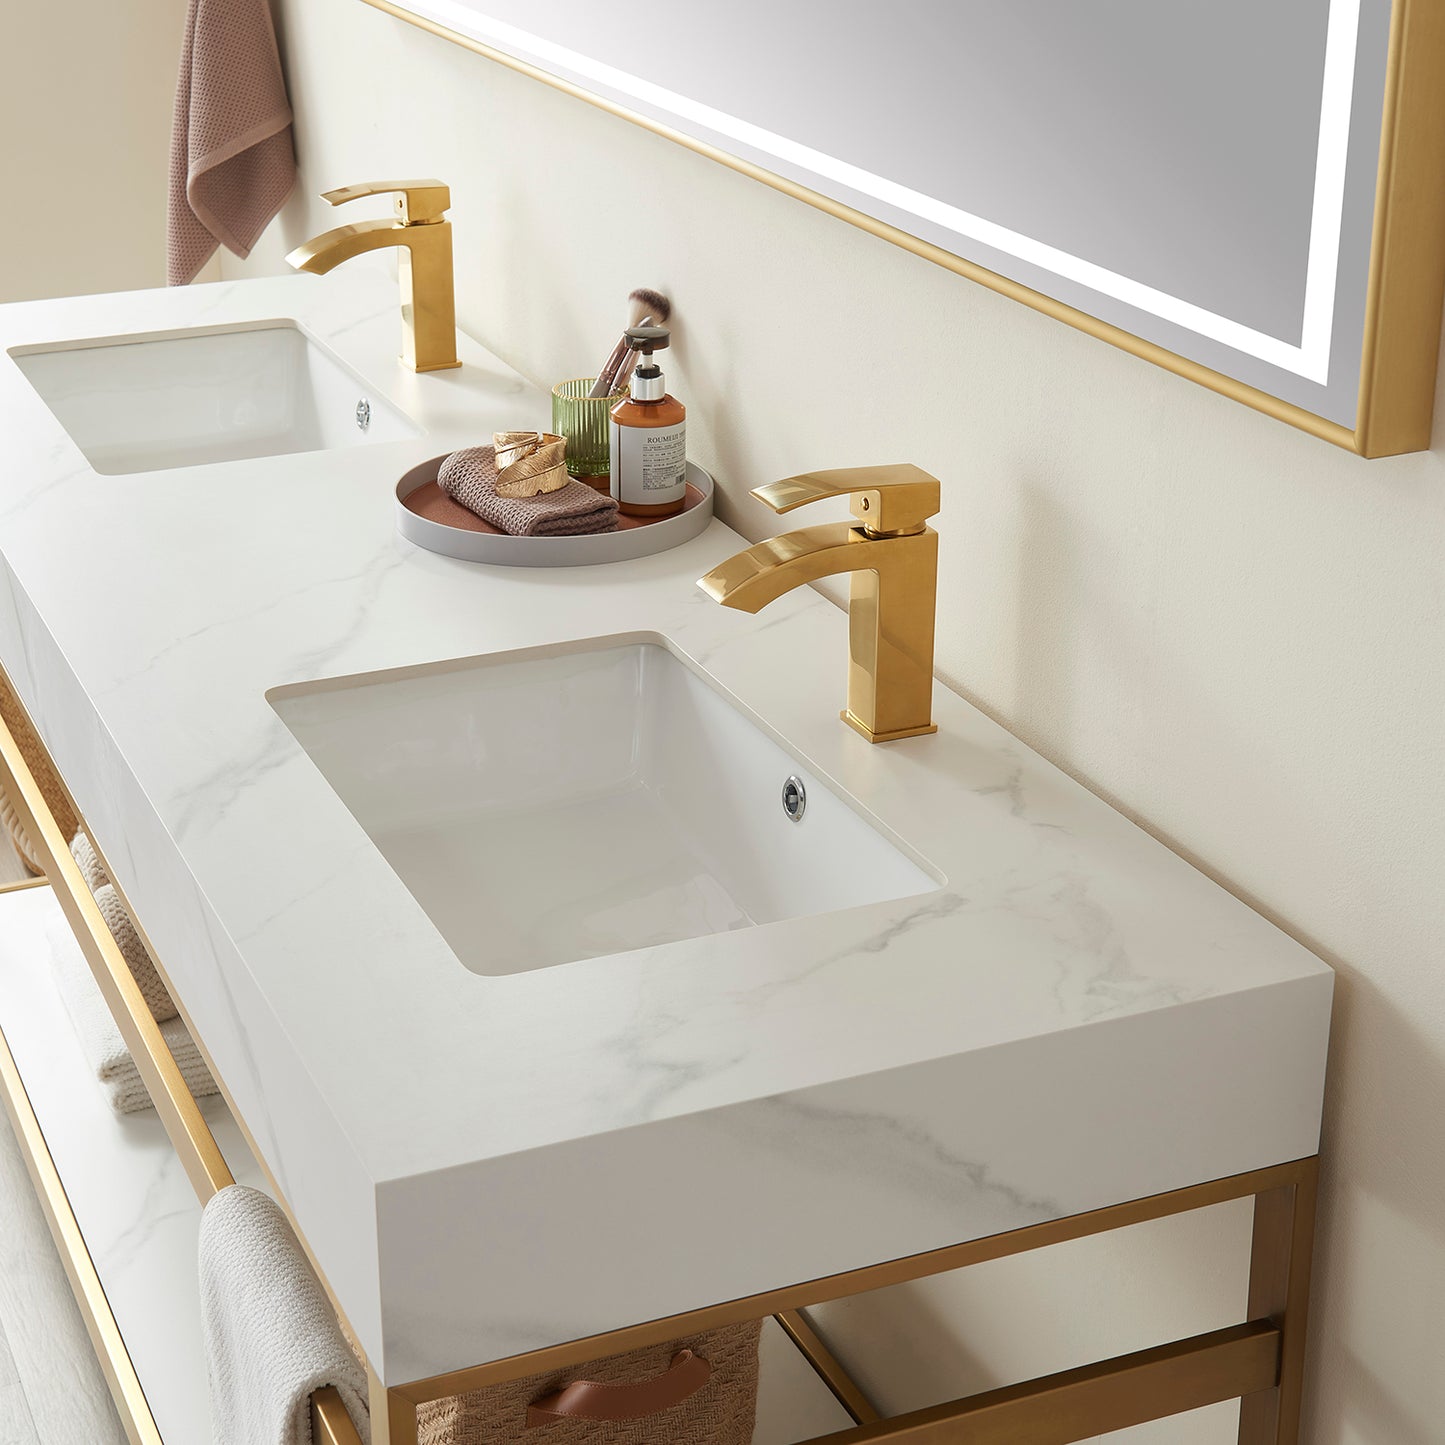 Funes 72" Double Sink Bath Vanity in Brushed Gold Metal Support with White Sintered Stone Top and Mirror